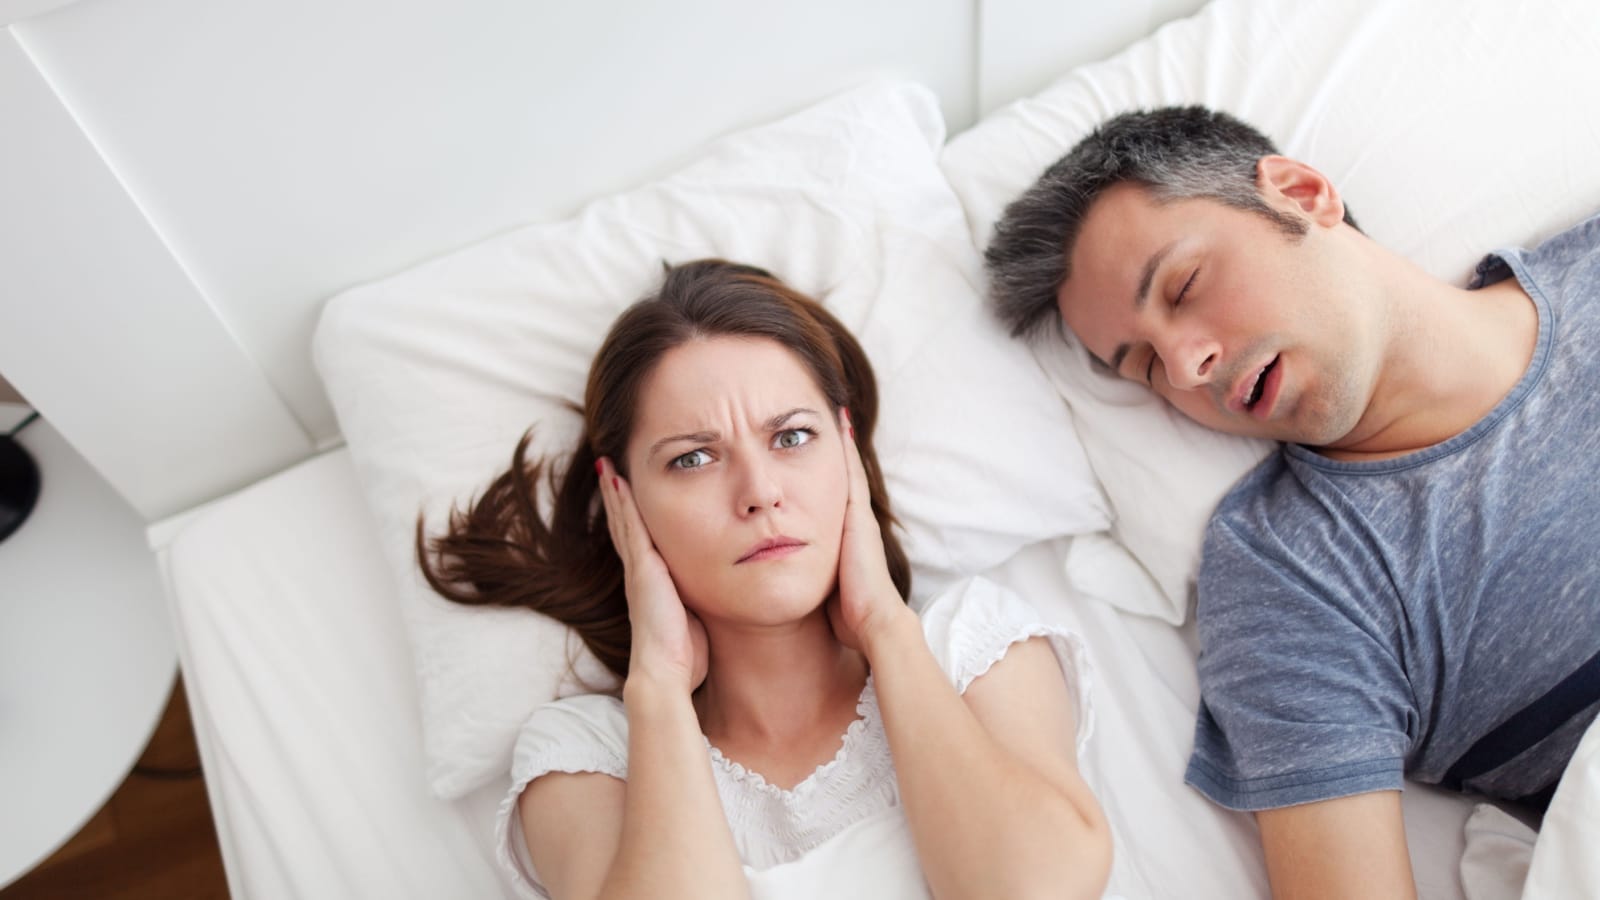 <p>According to studies and research at John Hopkins, approximately 45% of the adult population snores at least occasionally, with 25% snoring all the time. This can disturb the snorer's sleep, as well as the sleep of their bed partner.</p> <p>It is important to understand snoring and its health implications. Here is what medical doctors and science tell us.</p>